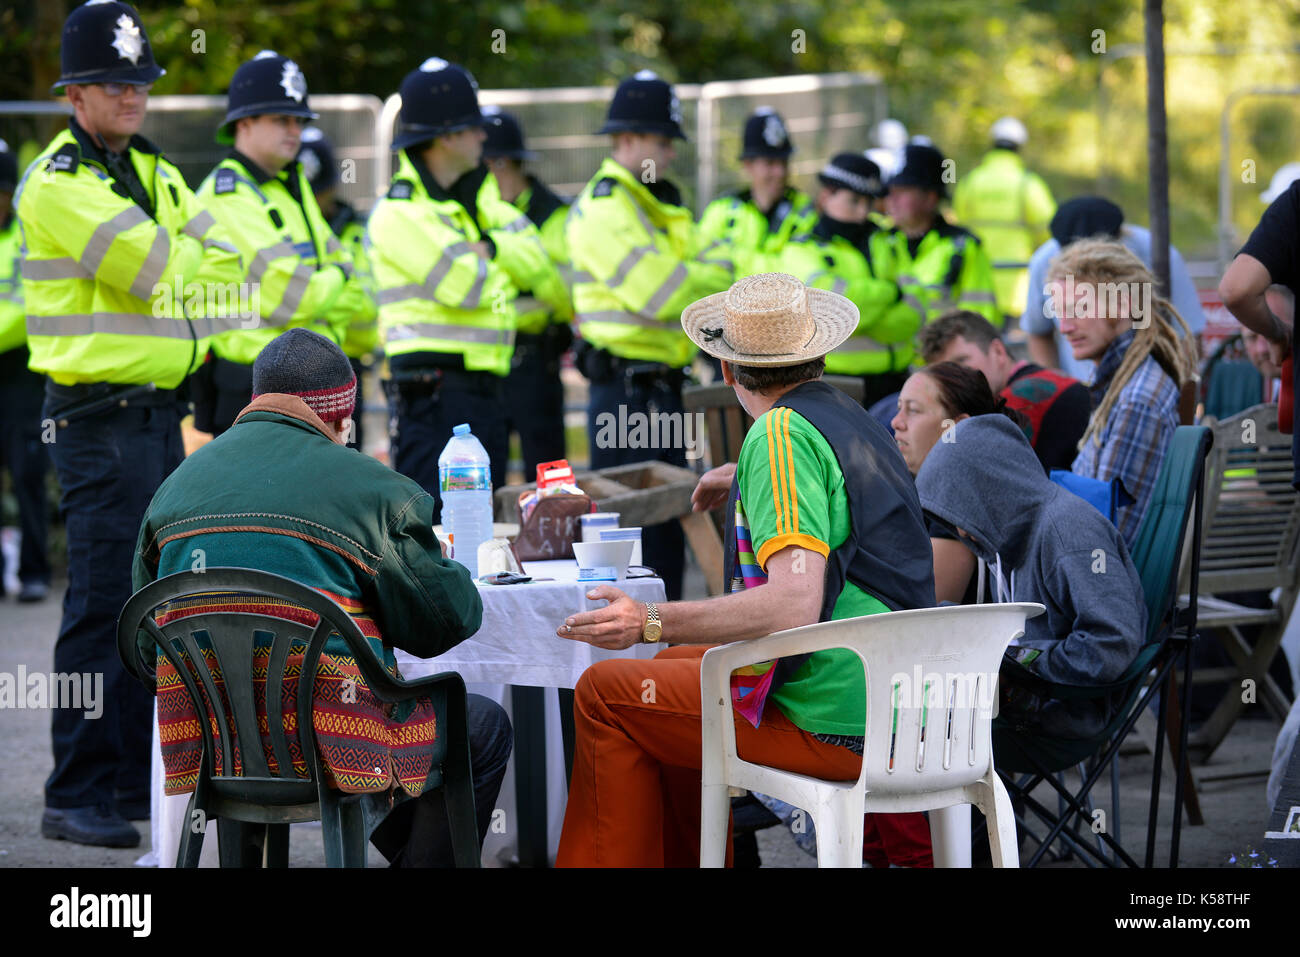 Protesters against fracking at Balcombe, Sussex take a break while the police look on. Credit Terry Applin Stock Photo